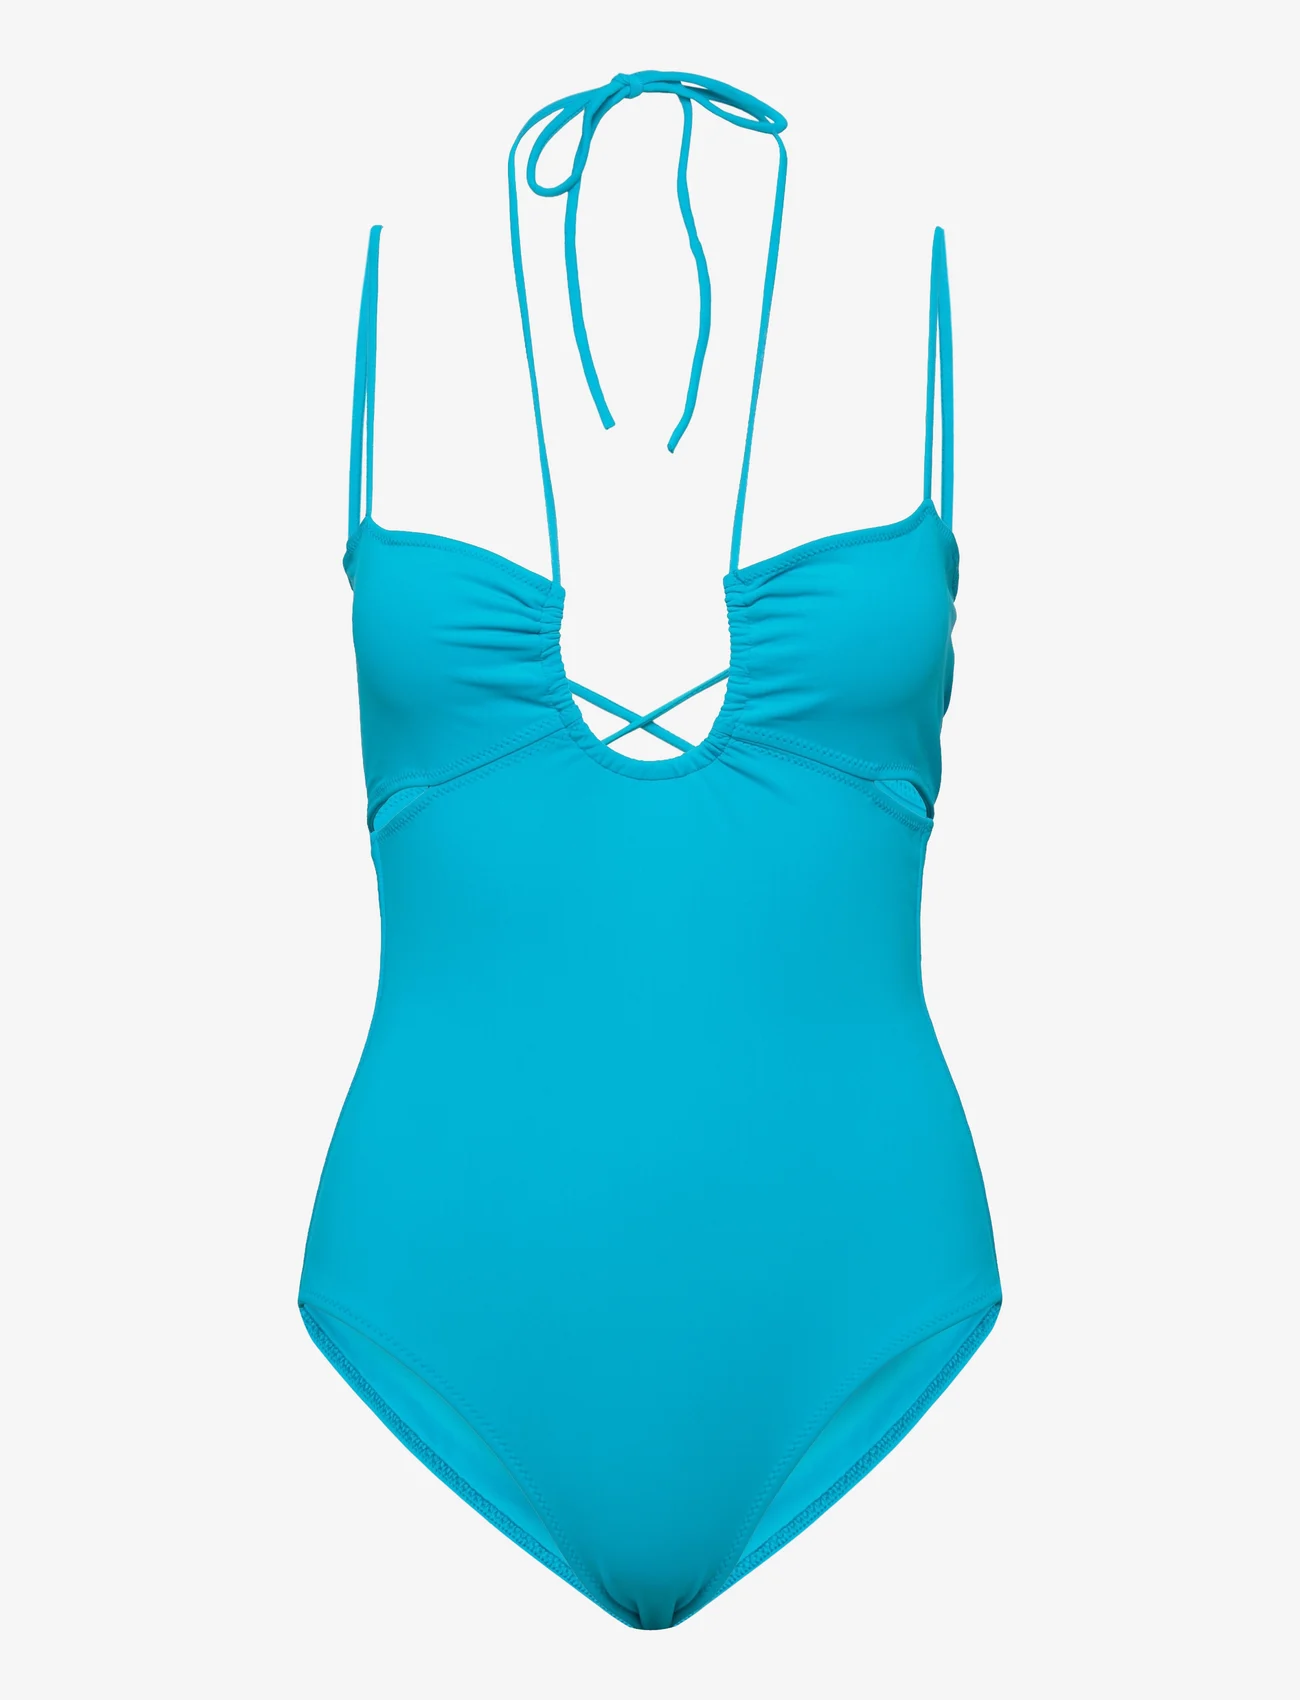 RODEBJER - Rodebjer Casoria - swimsuits - tropic blue - 0